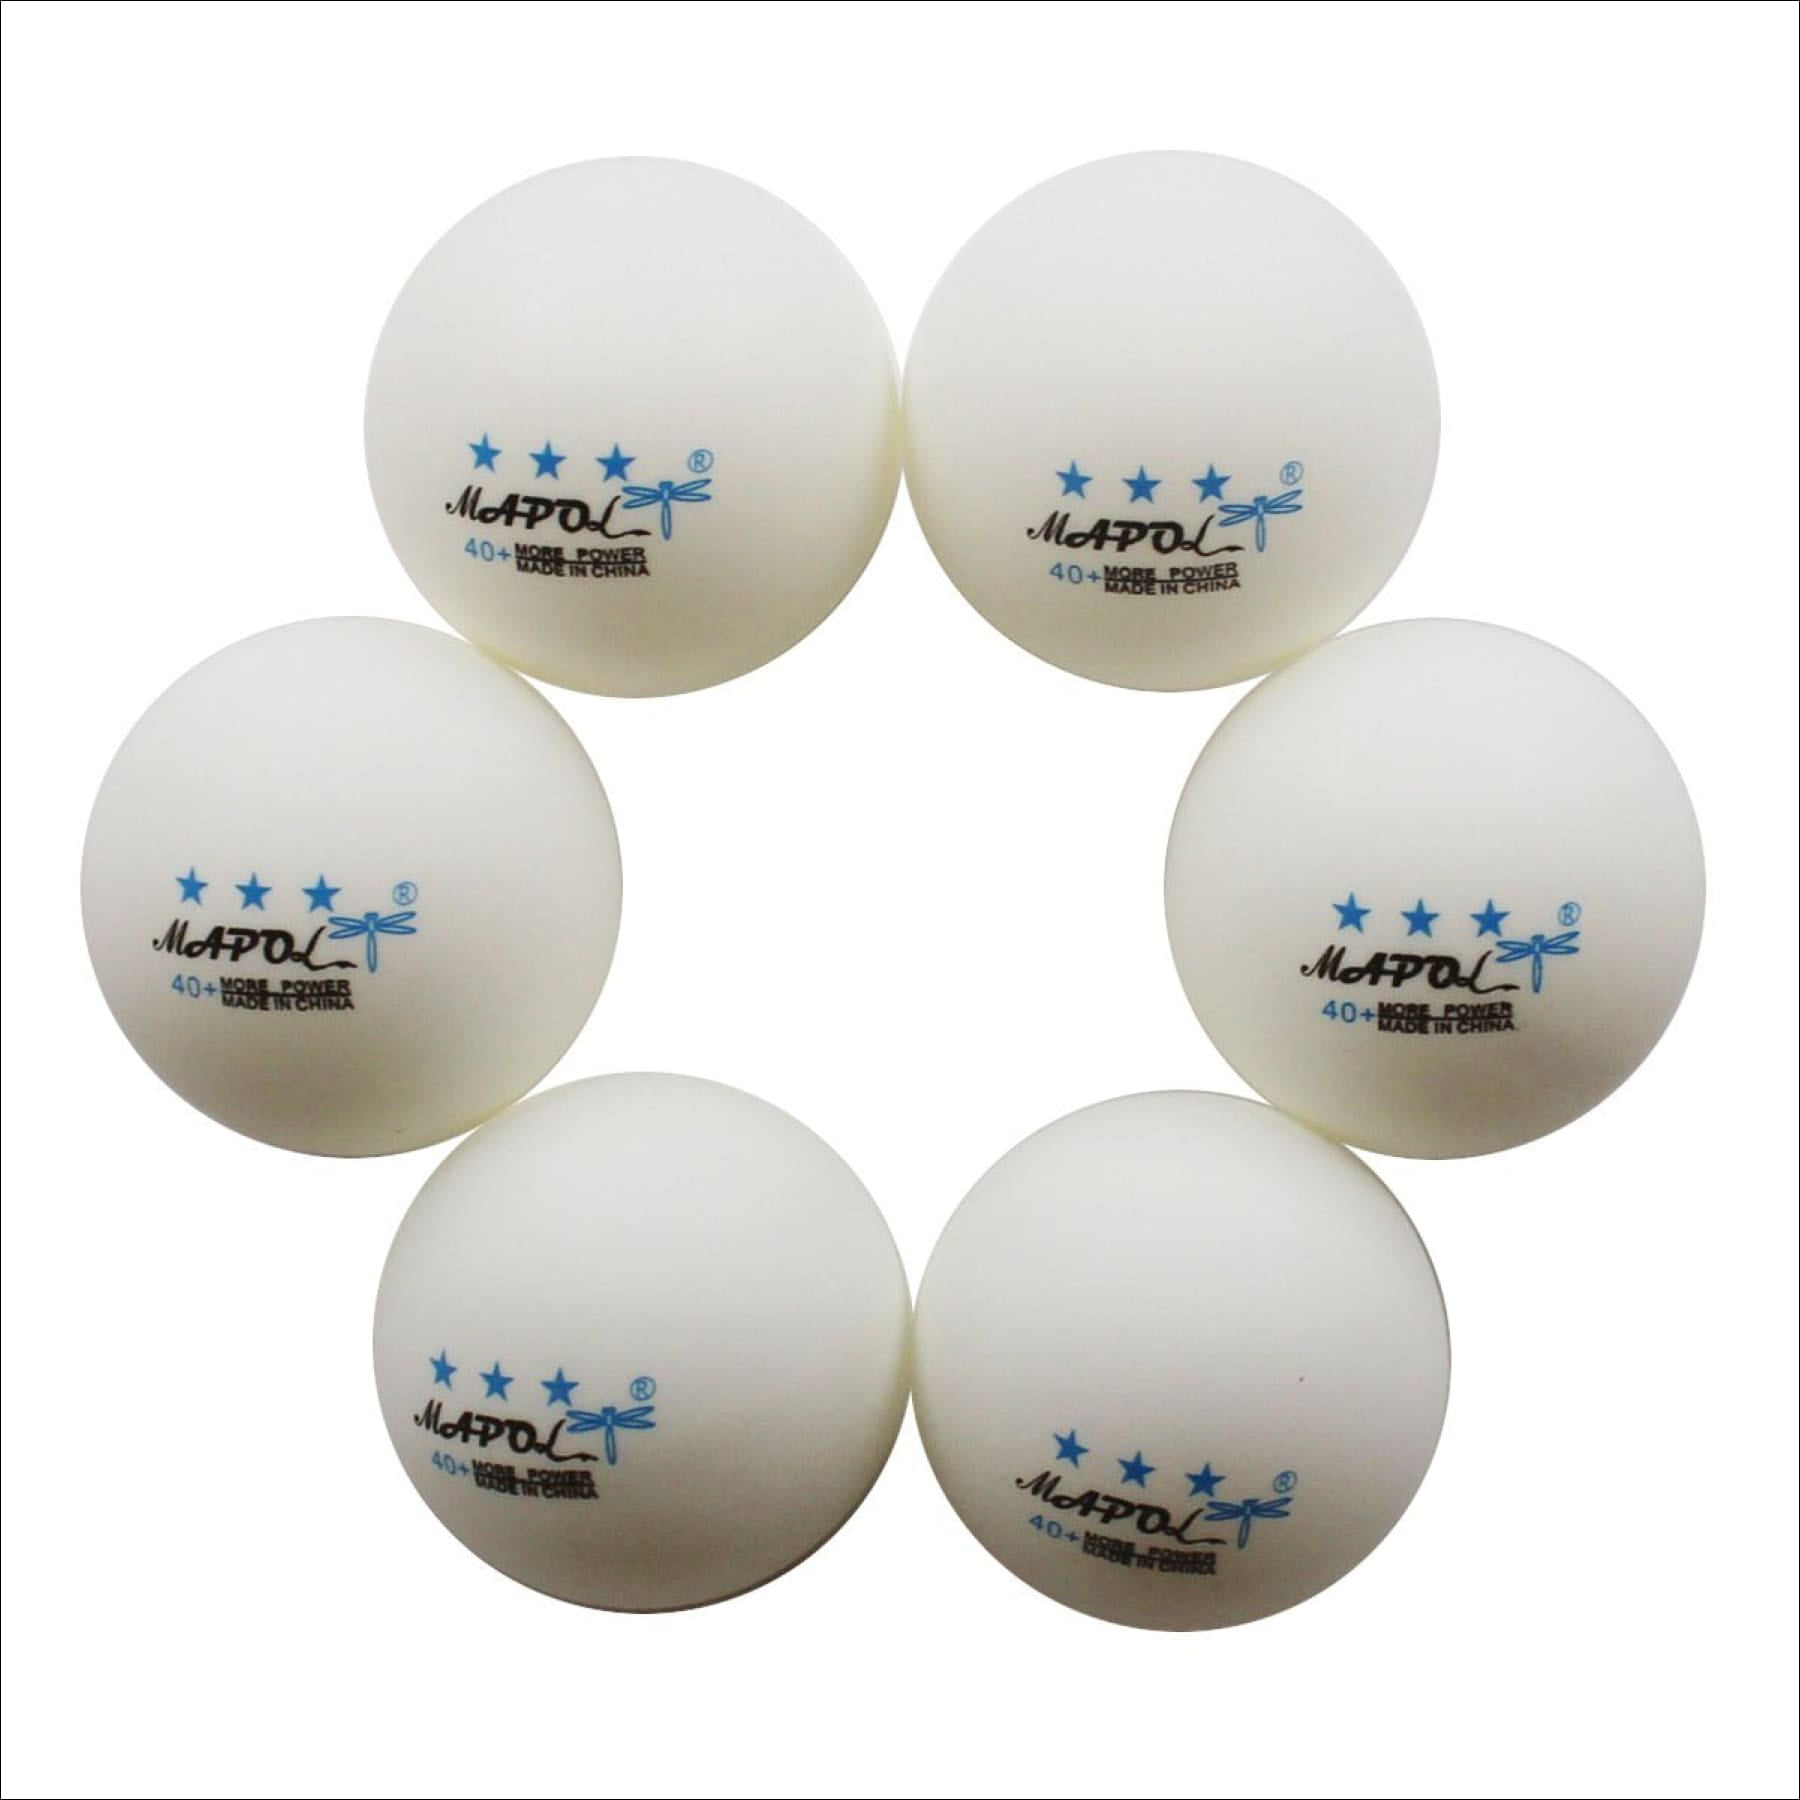 MAPOL 100 Counts 3-Star Orange Practice Ping Pong Balls Advanced Table Tennis 